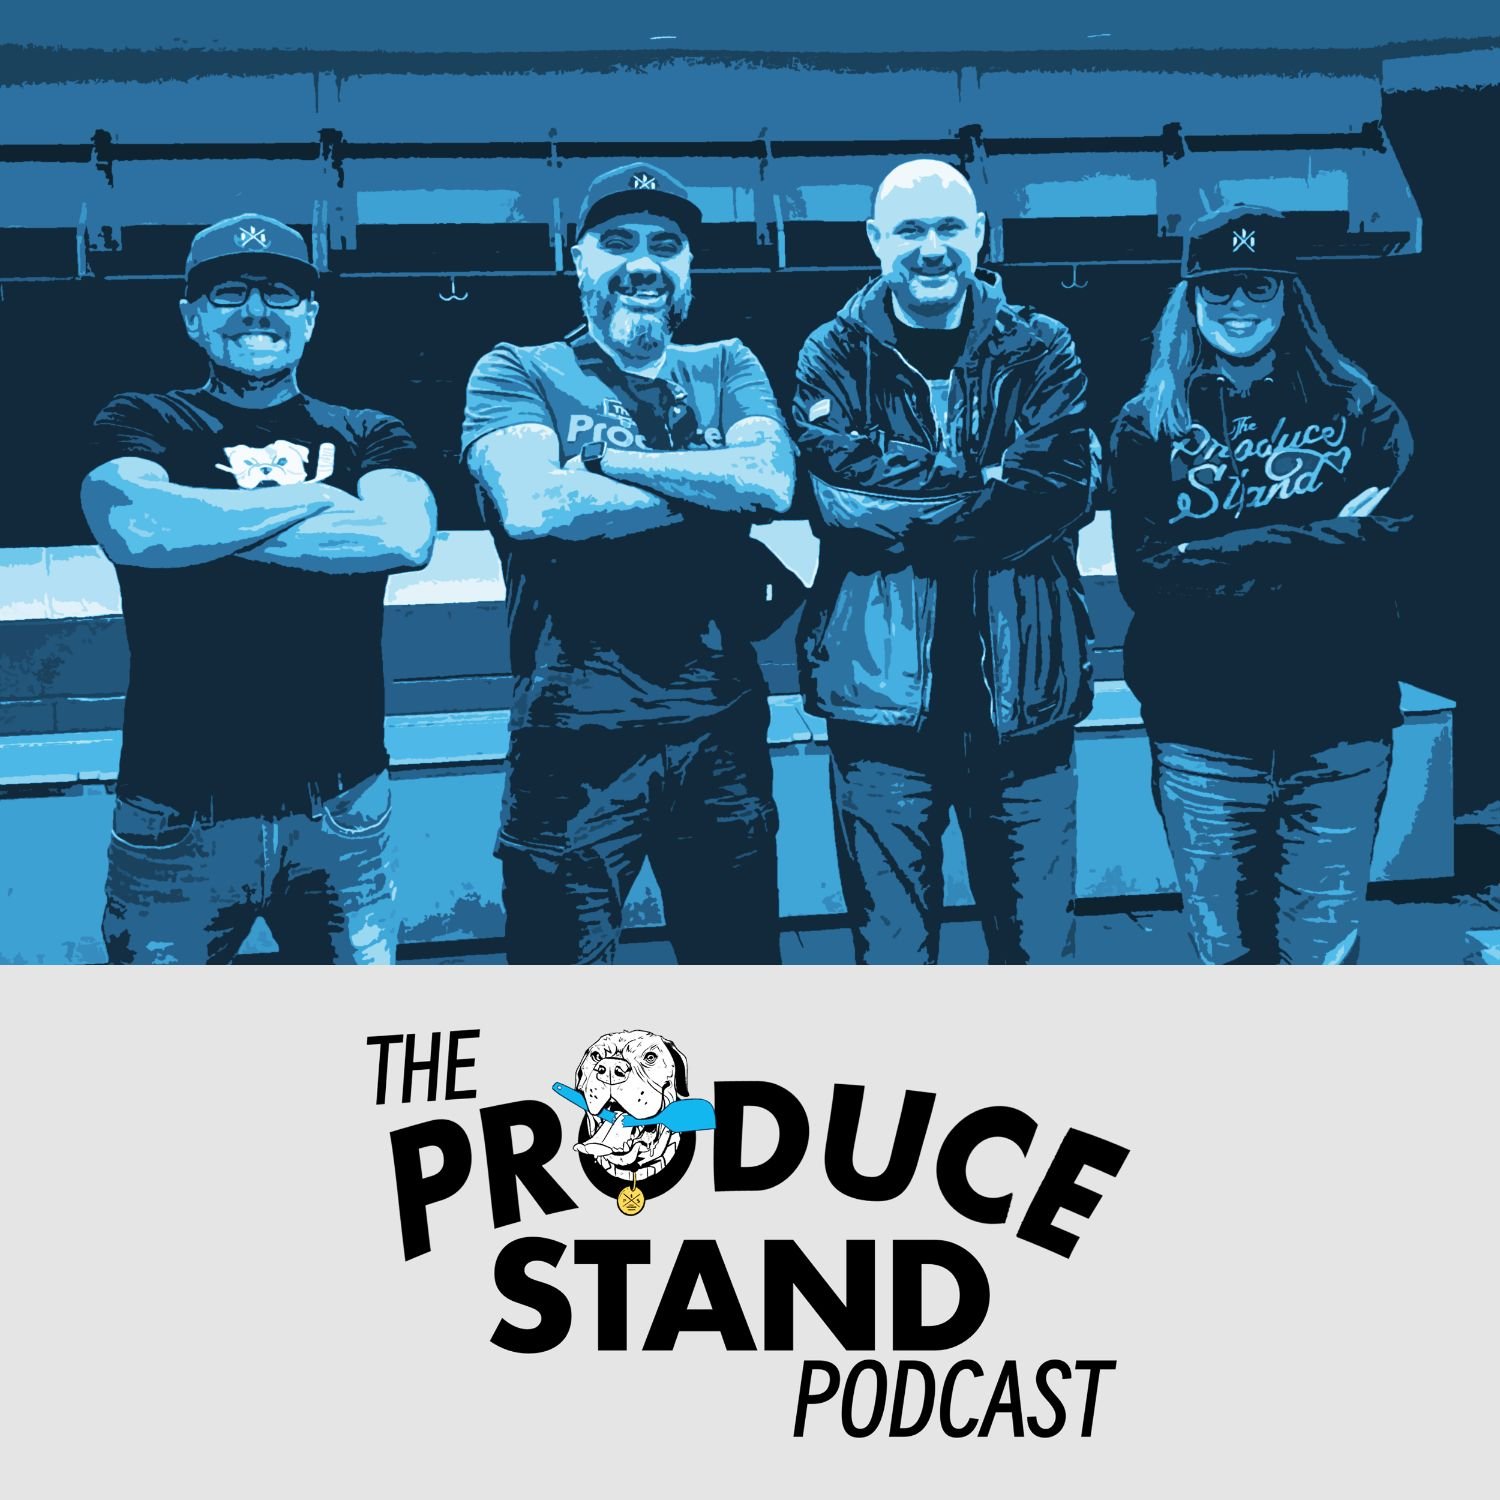 The Produce Stand Podcast podcast show image